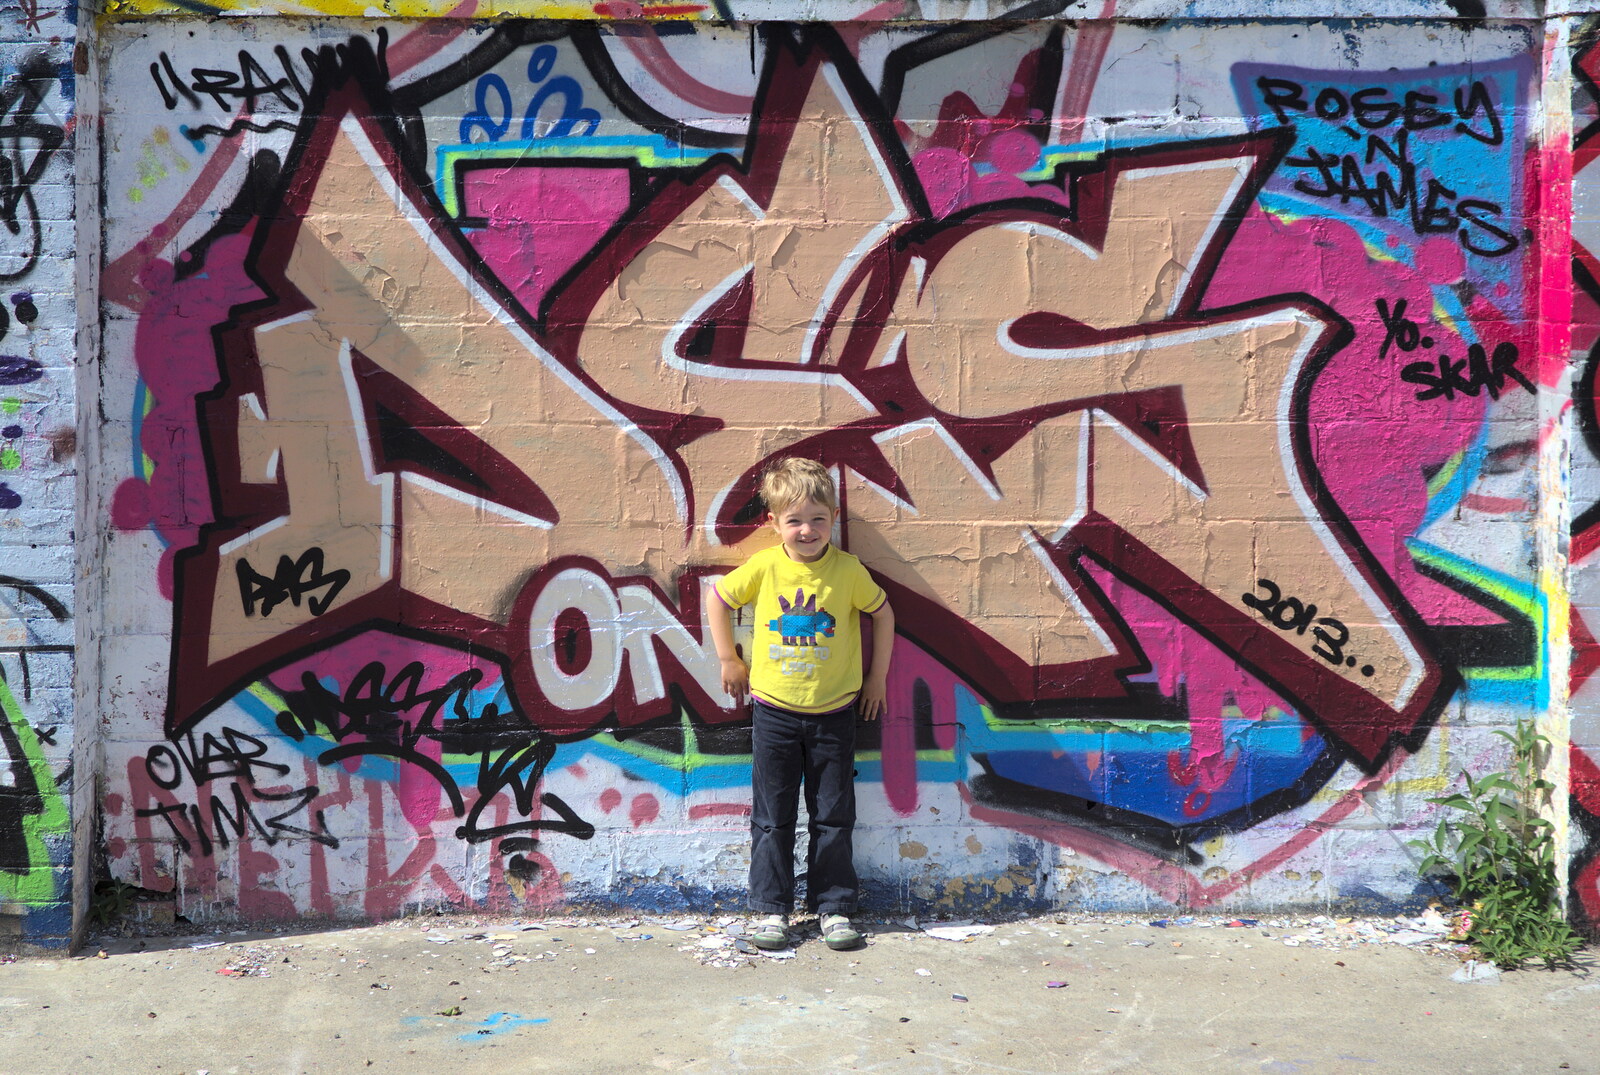 Fred stands by the graffiti wall from The Dereliction of HMSO, Botolph Street, Norwich - 26th May 2013